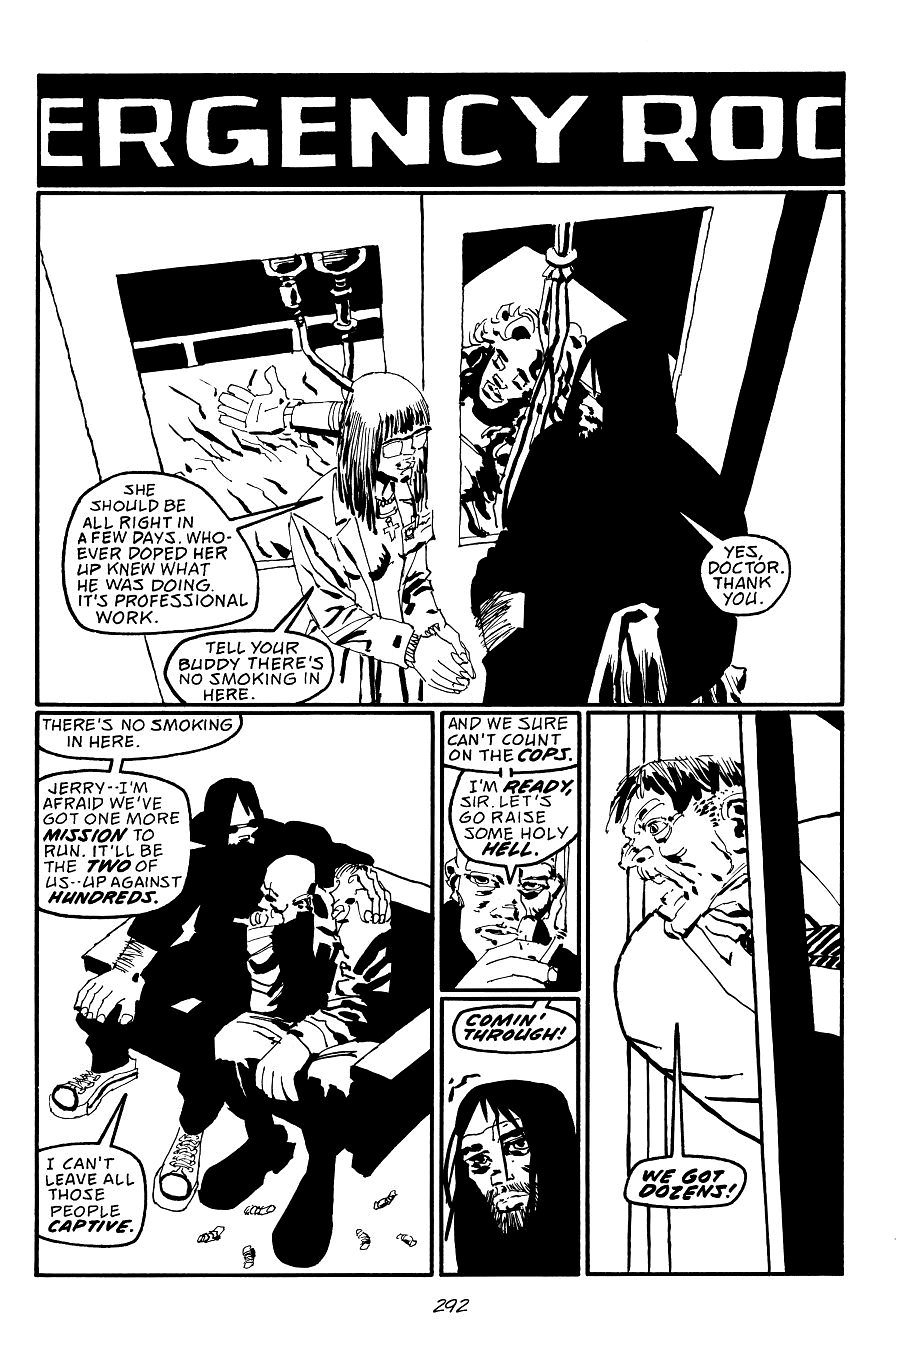 page 292 of sin city 7 hell and back